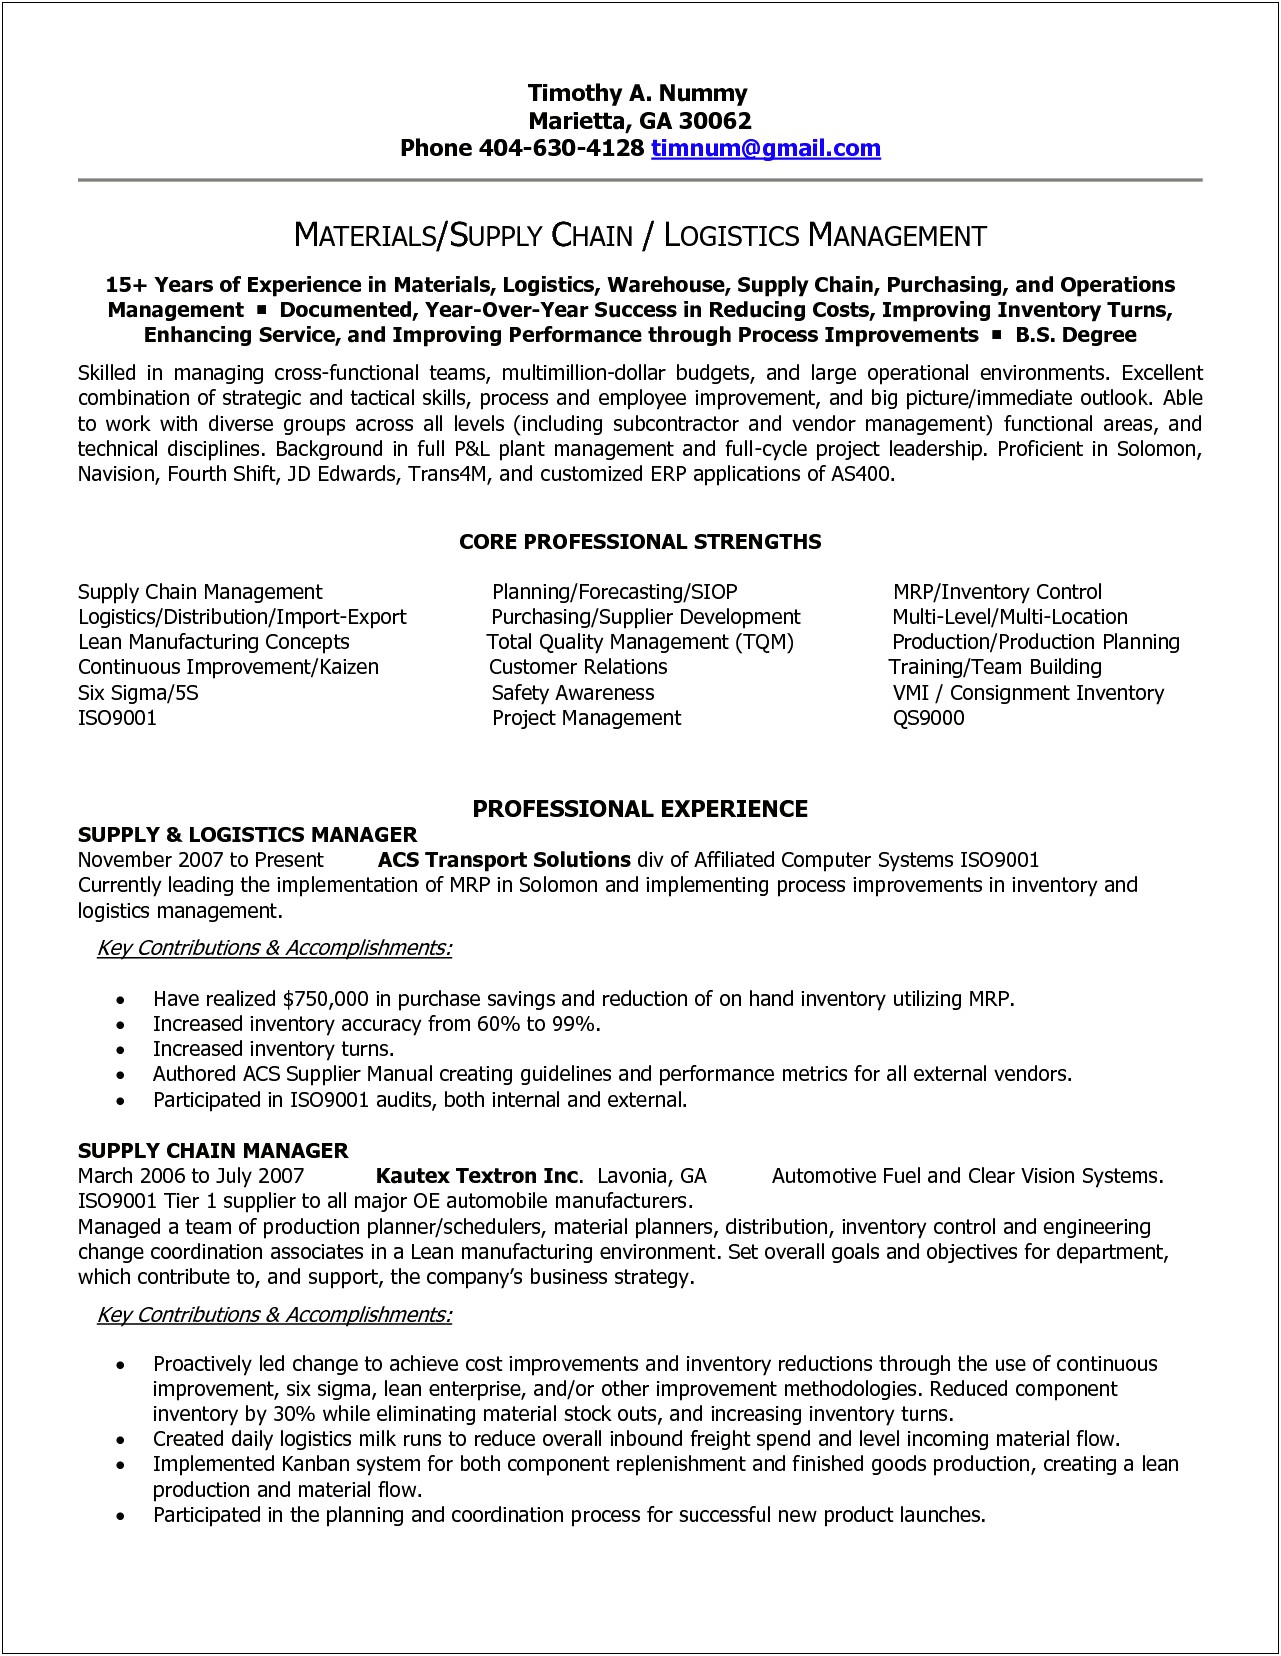 Resume Format For Logistics And Supply Chain Management